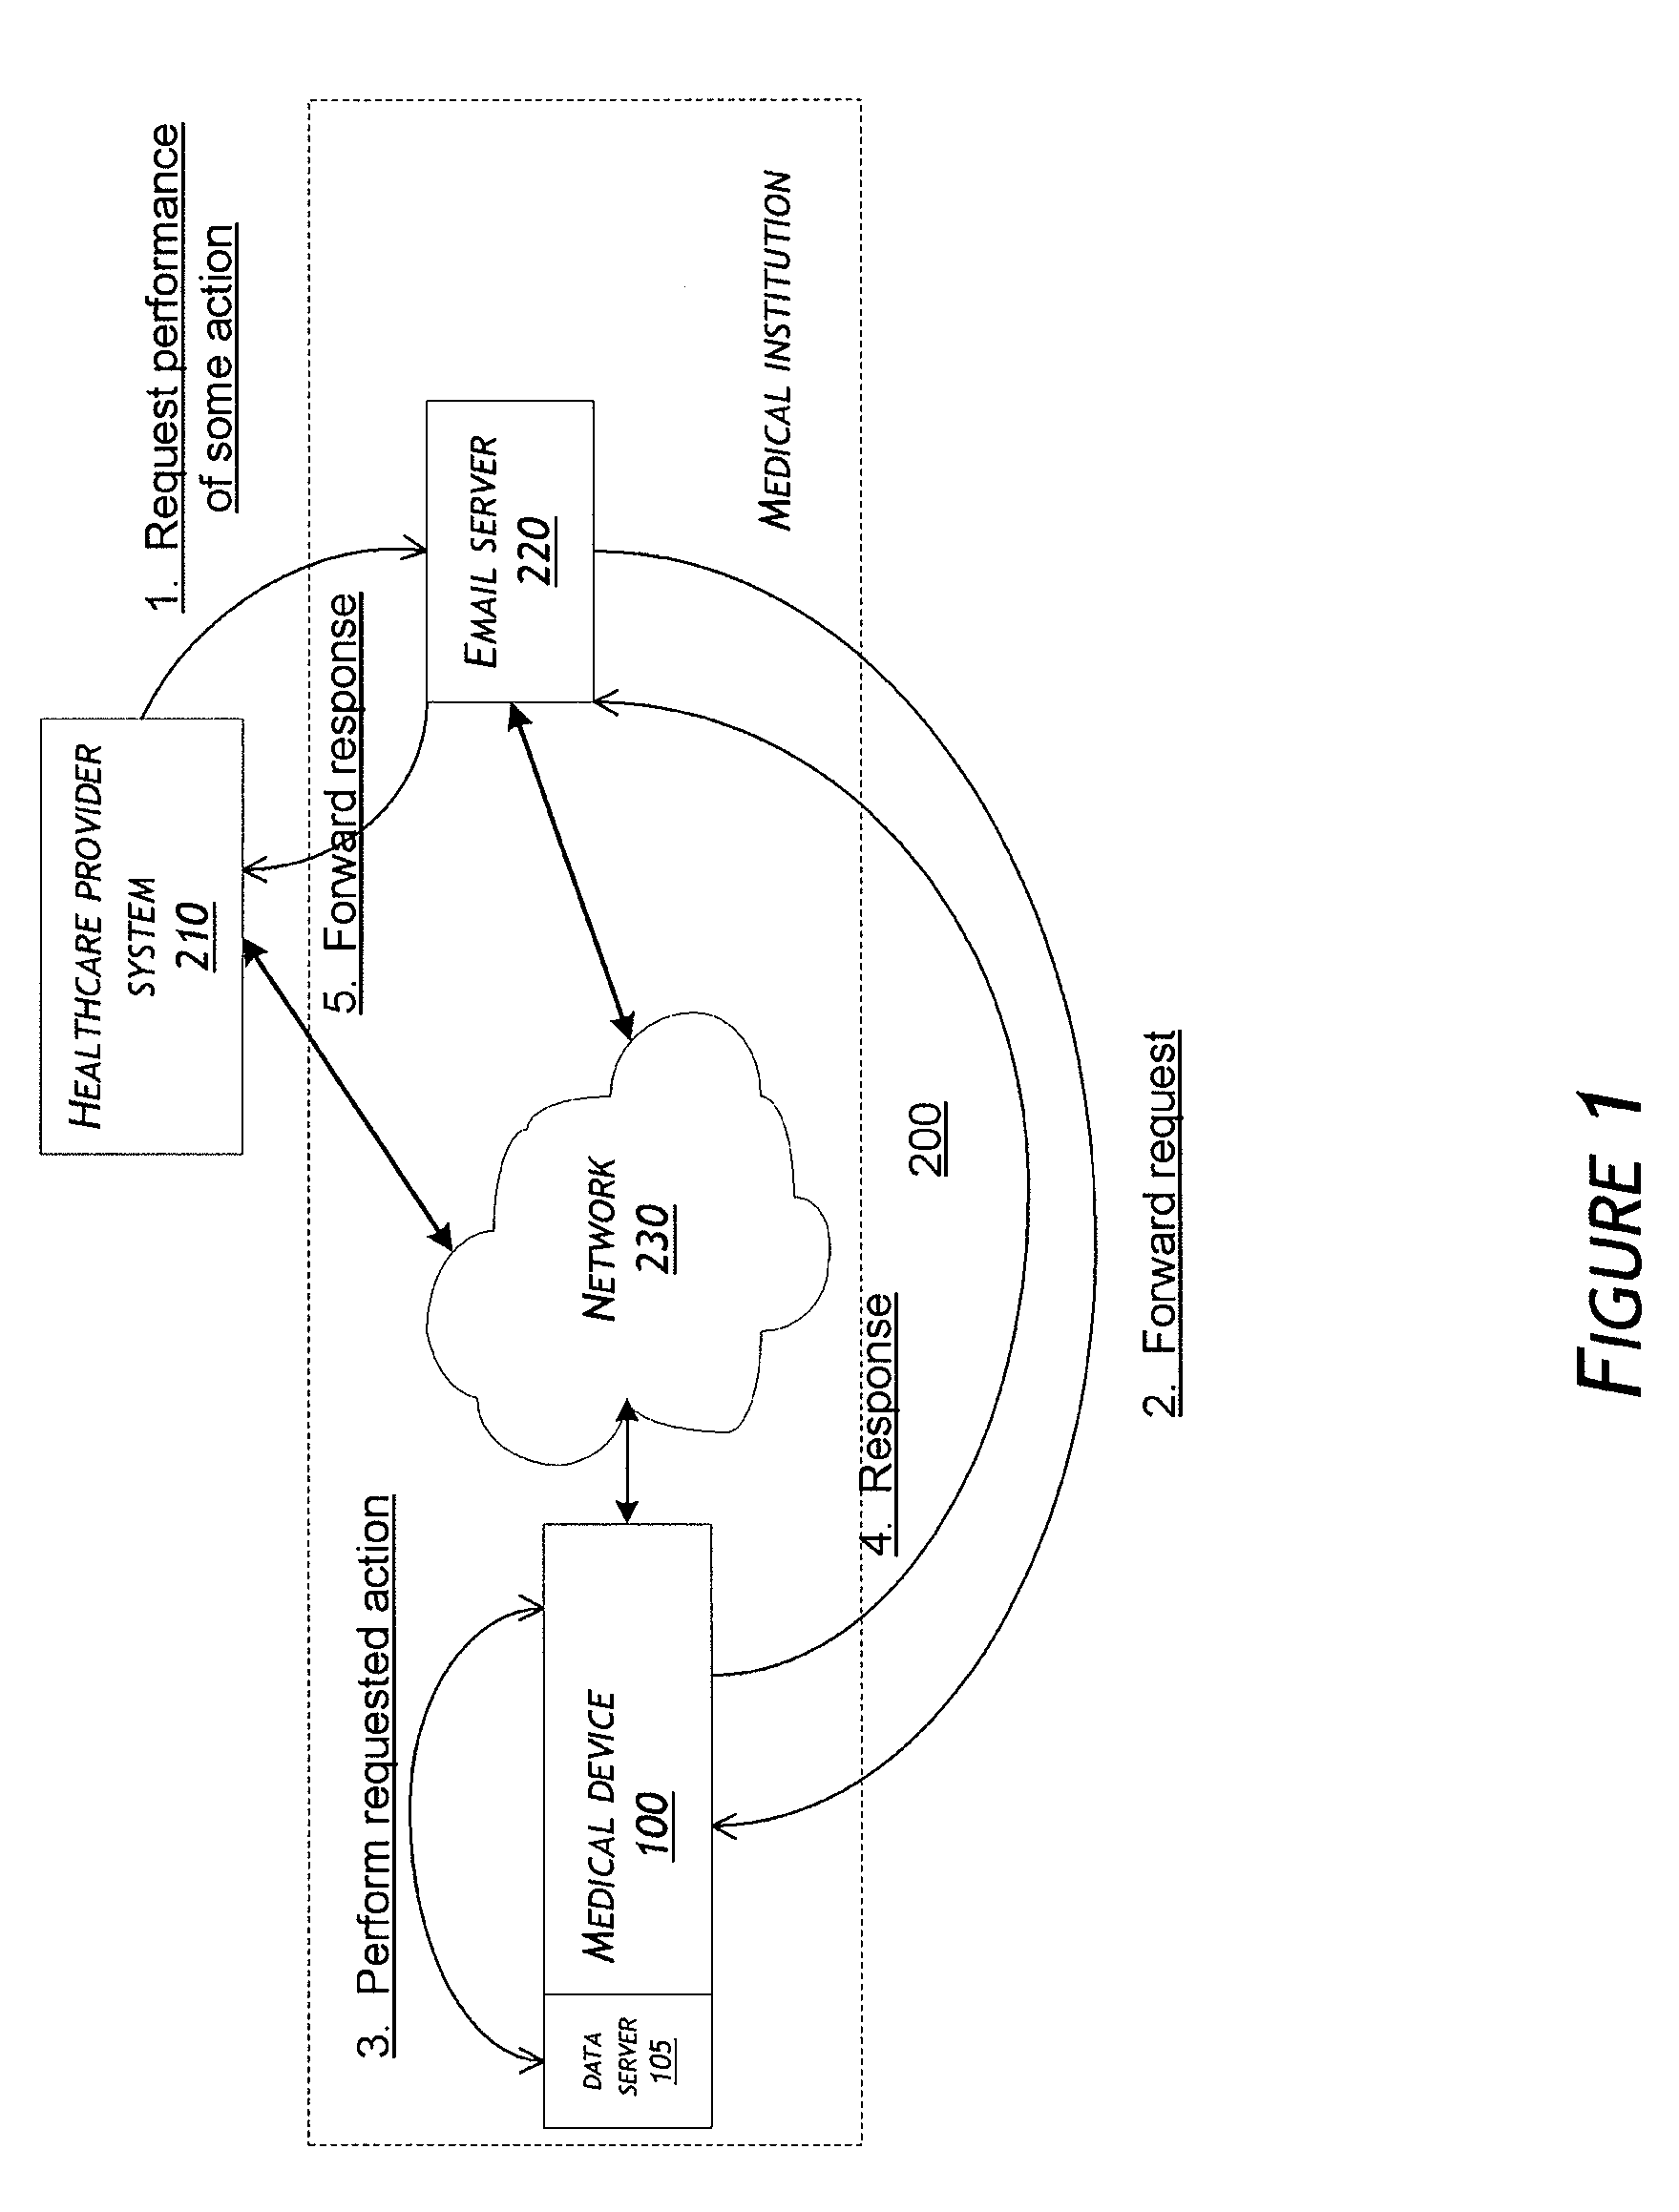 System and method for communicating over a network with a medical device